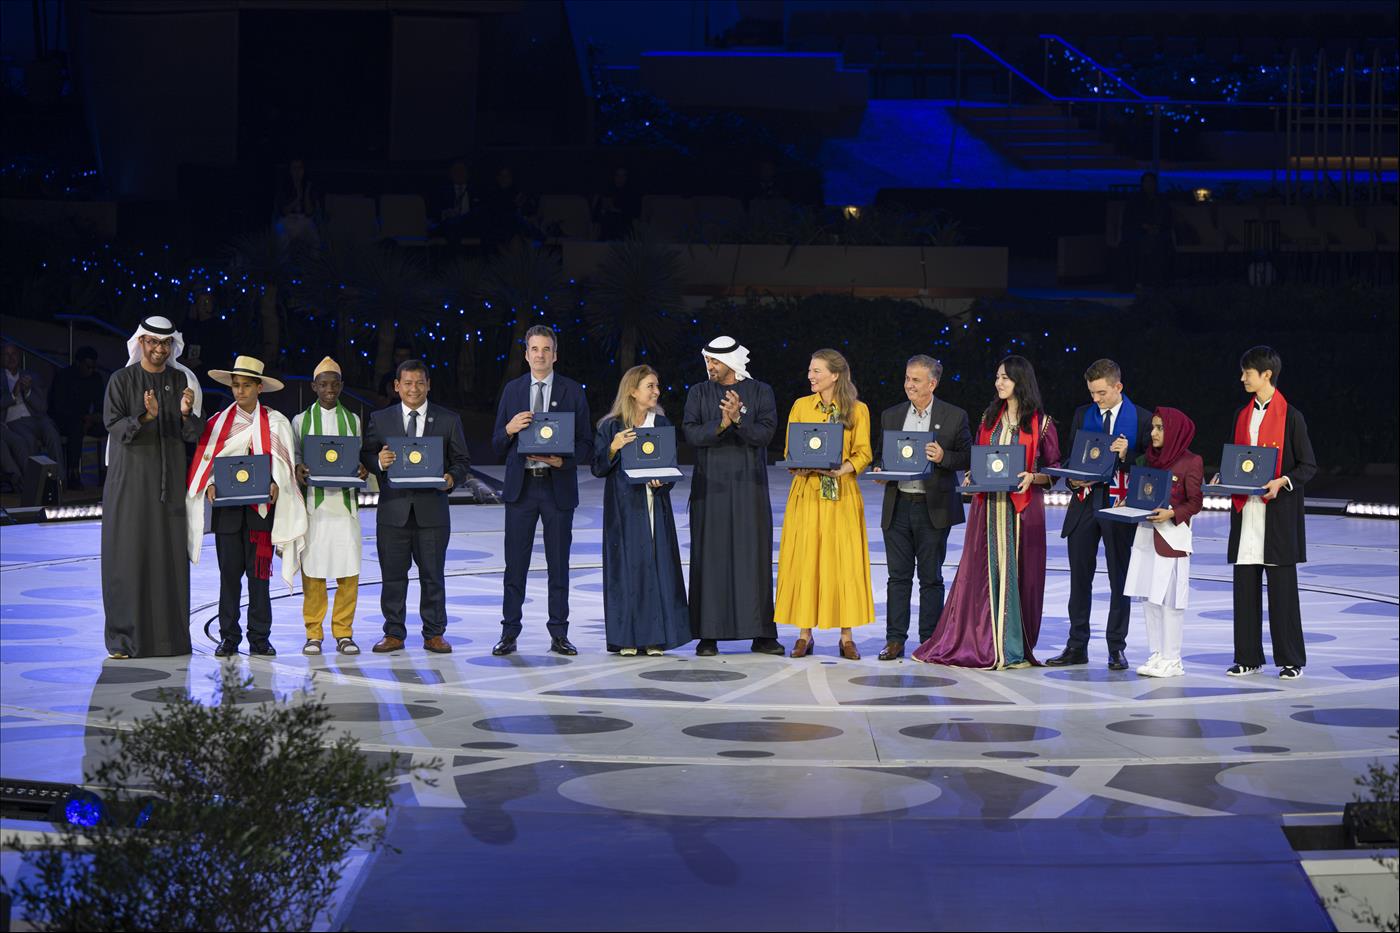 11 Winners Recognised At Zayed Sustainability Prize Awards Ceremony Held During COP28 UAE